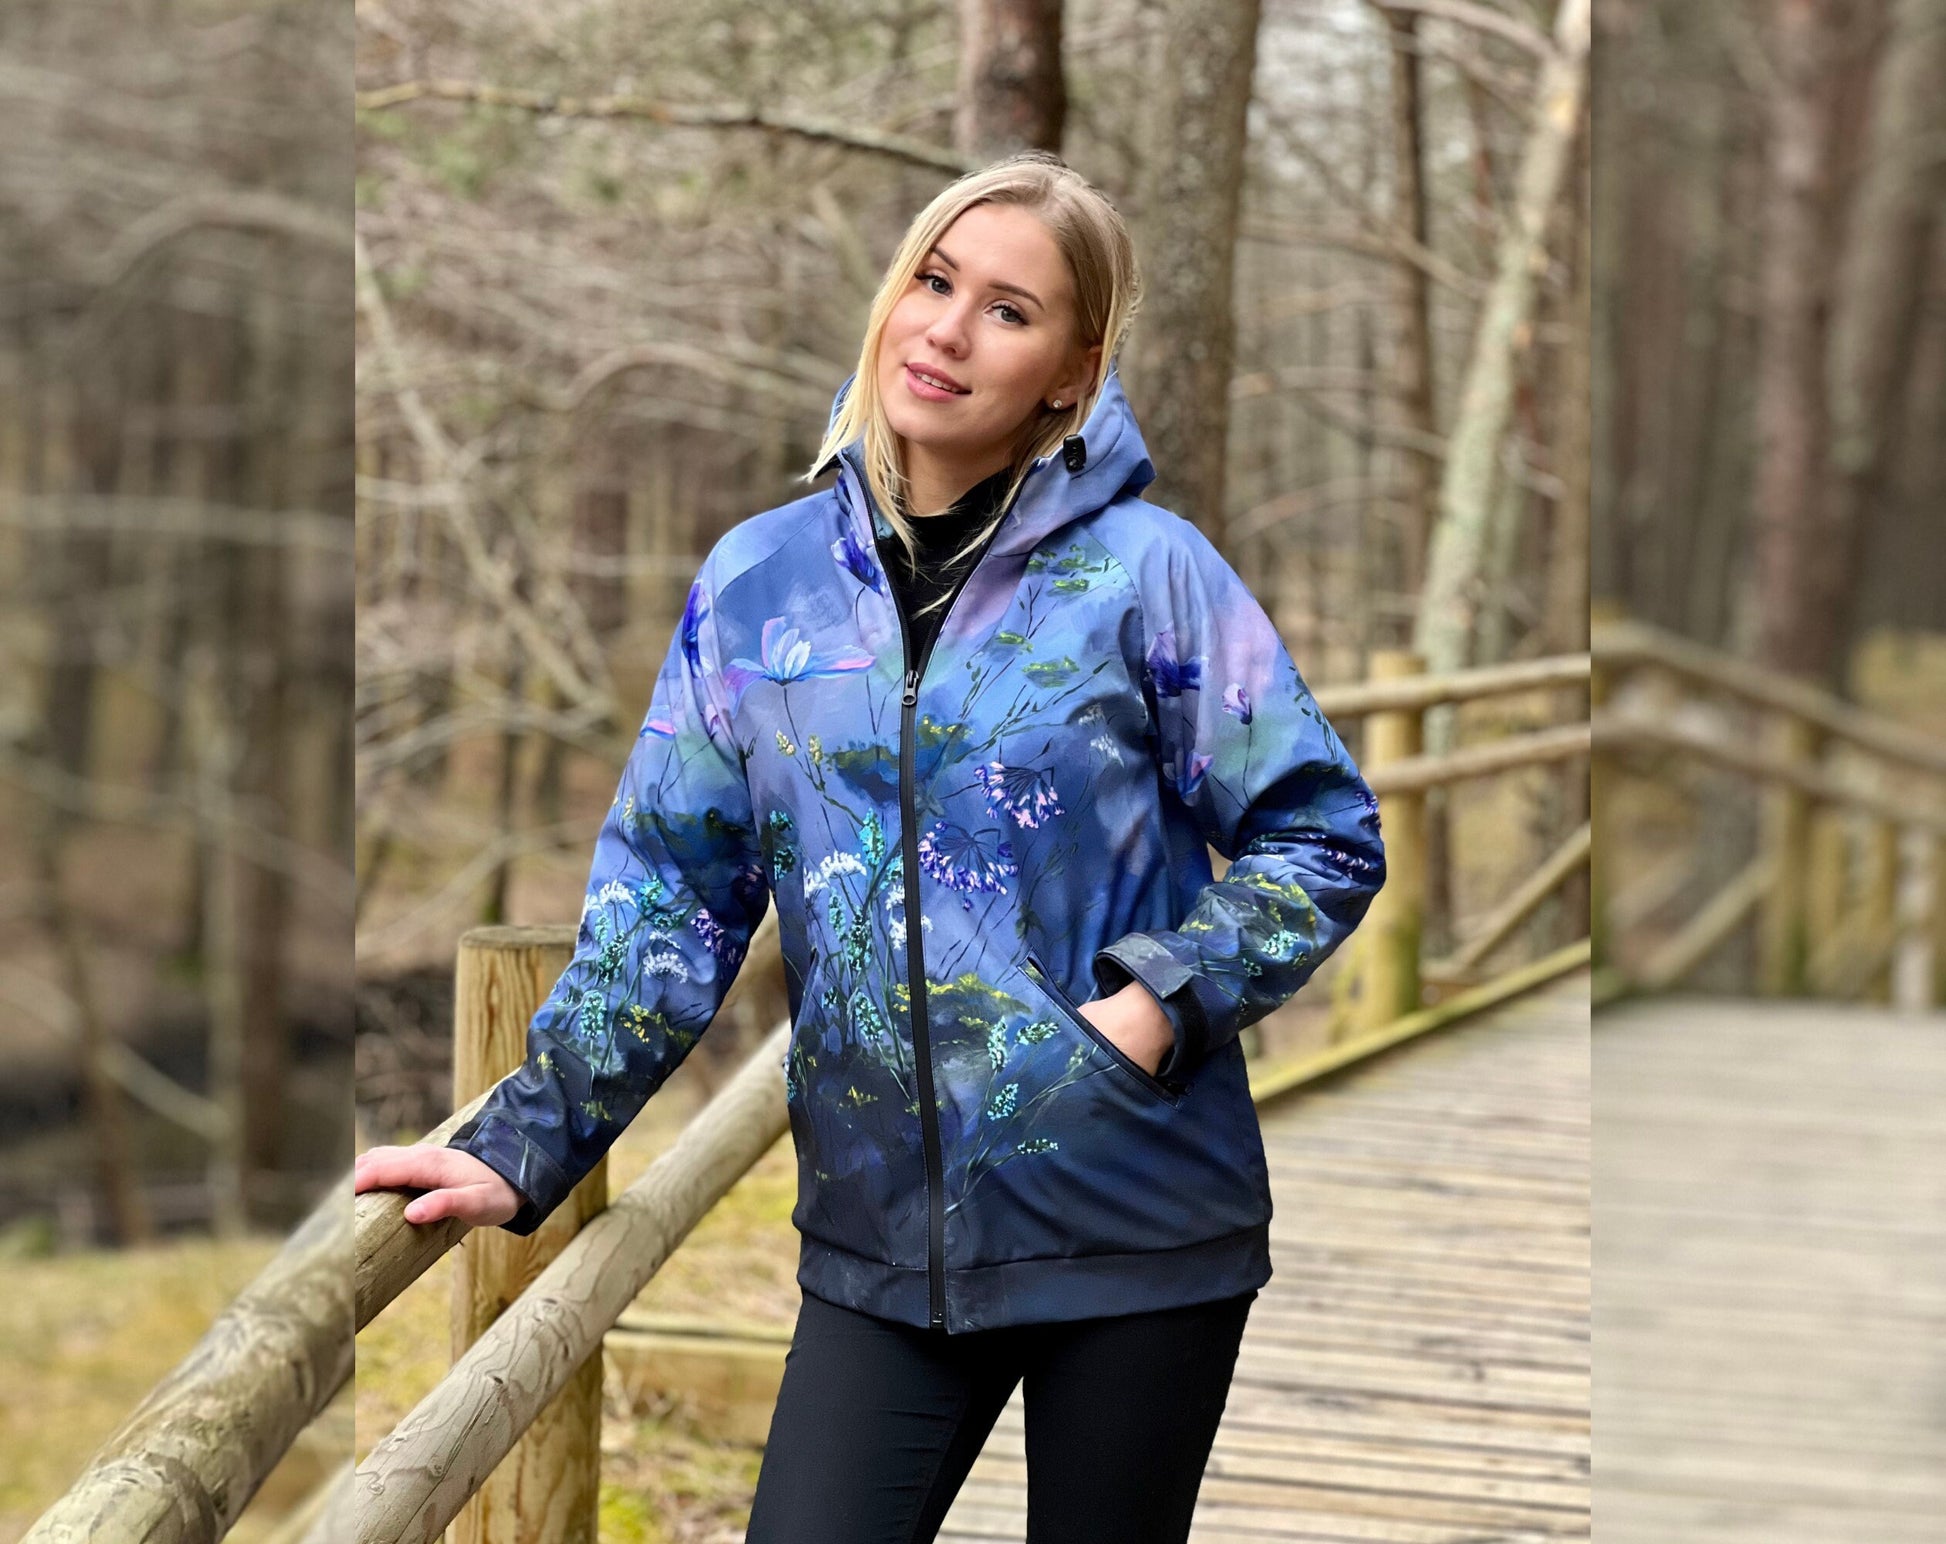 Windproof Jacket with pockets, Outwear, Floral Jacket, Sport Jacket for womens, Printed Jacket, Colourful jacket women, Spring Jacket